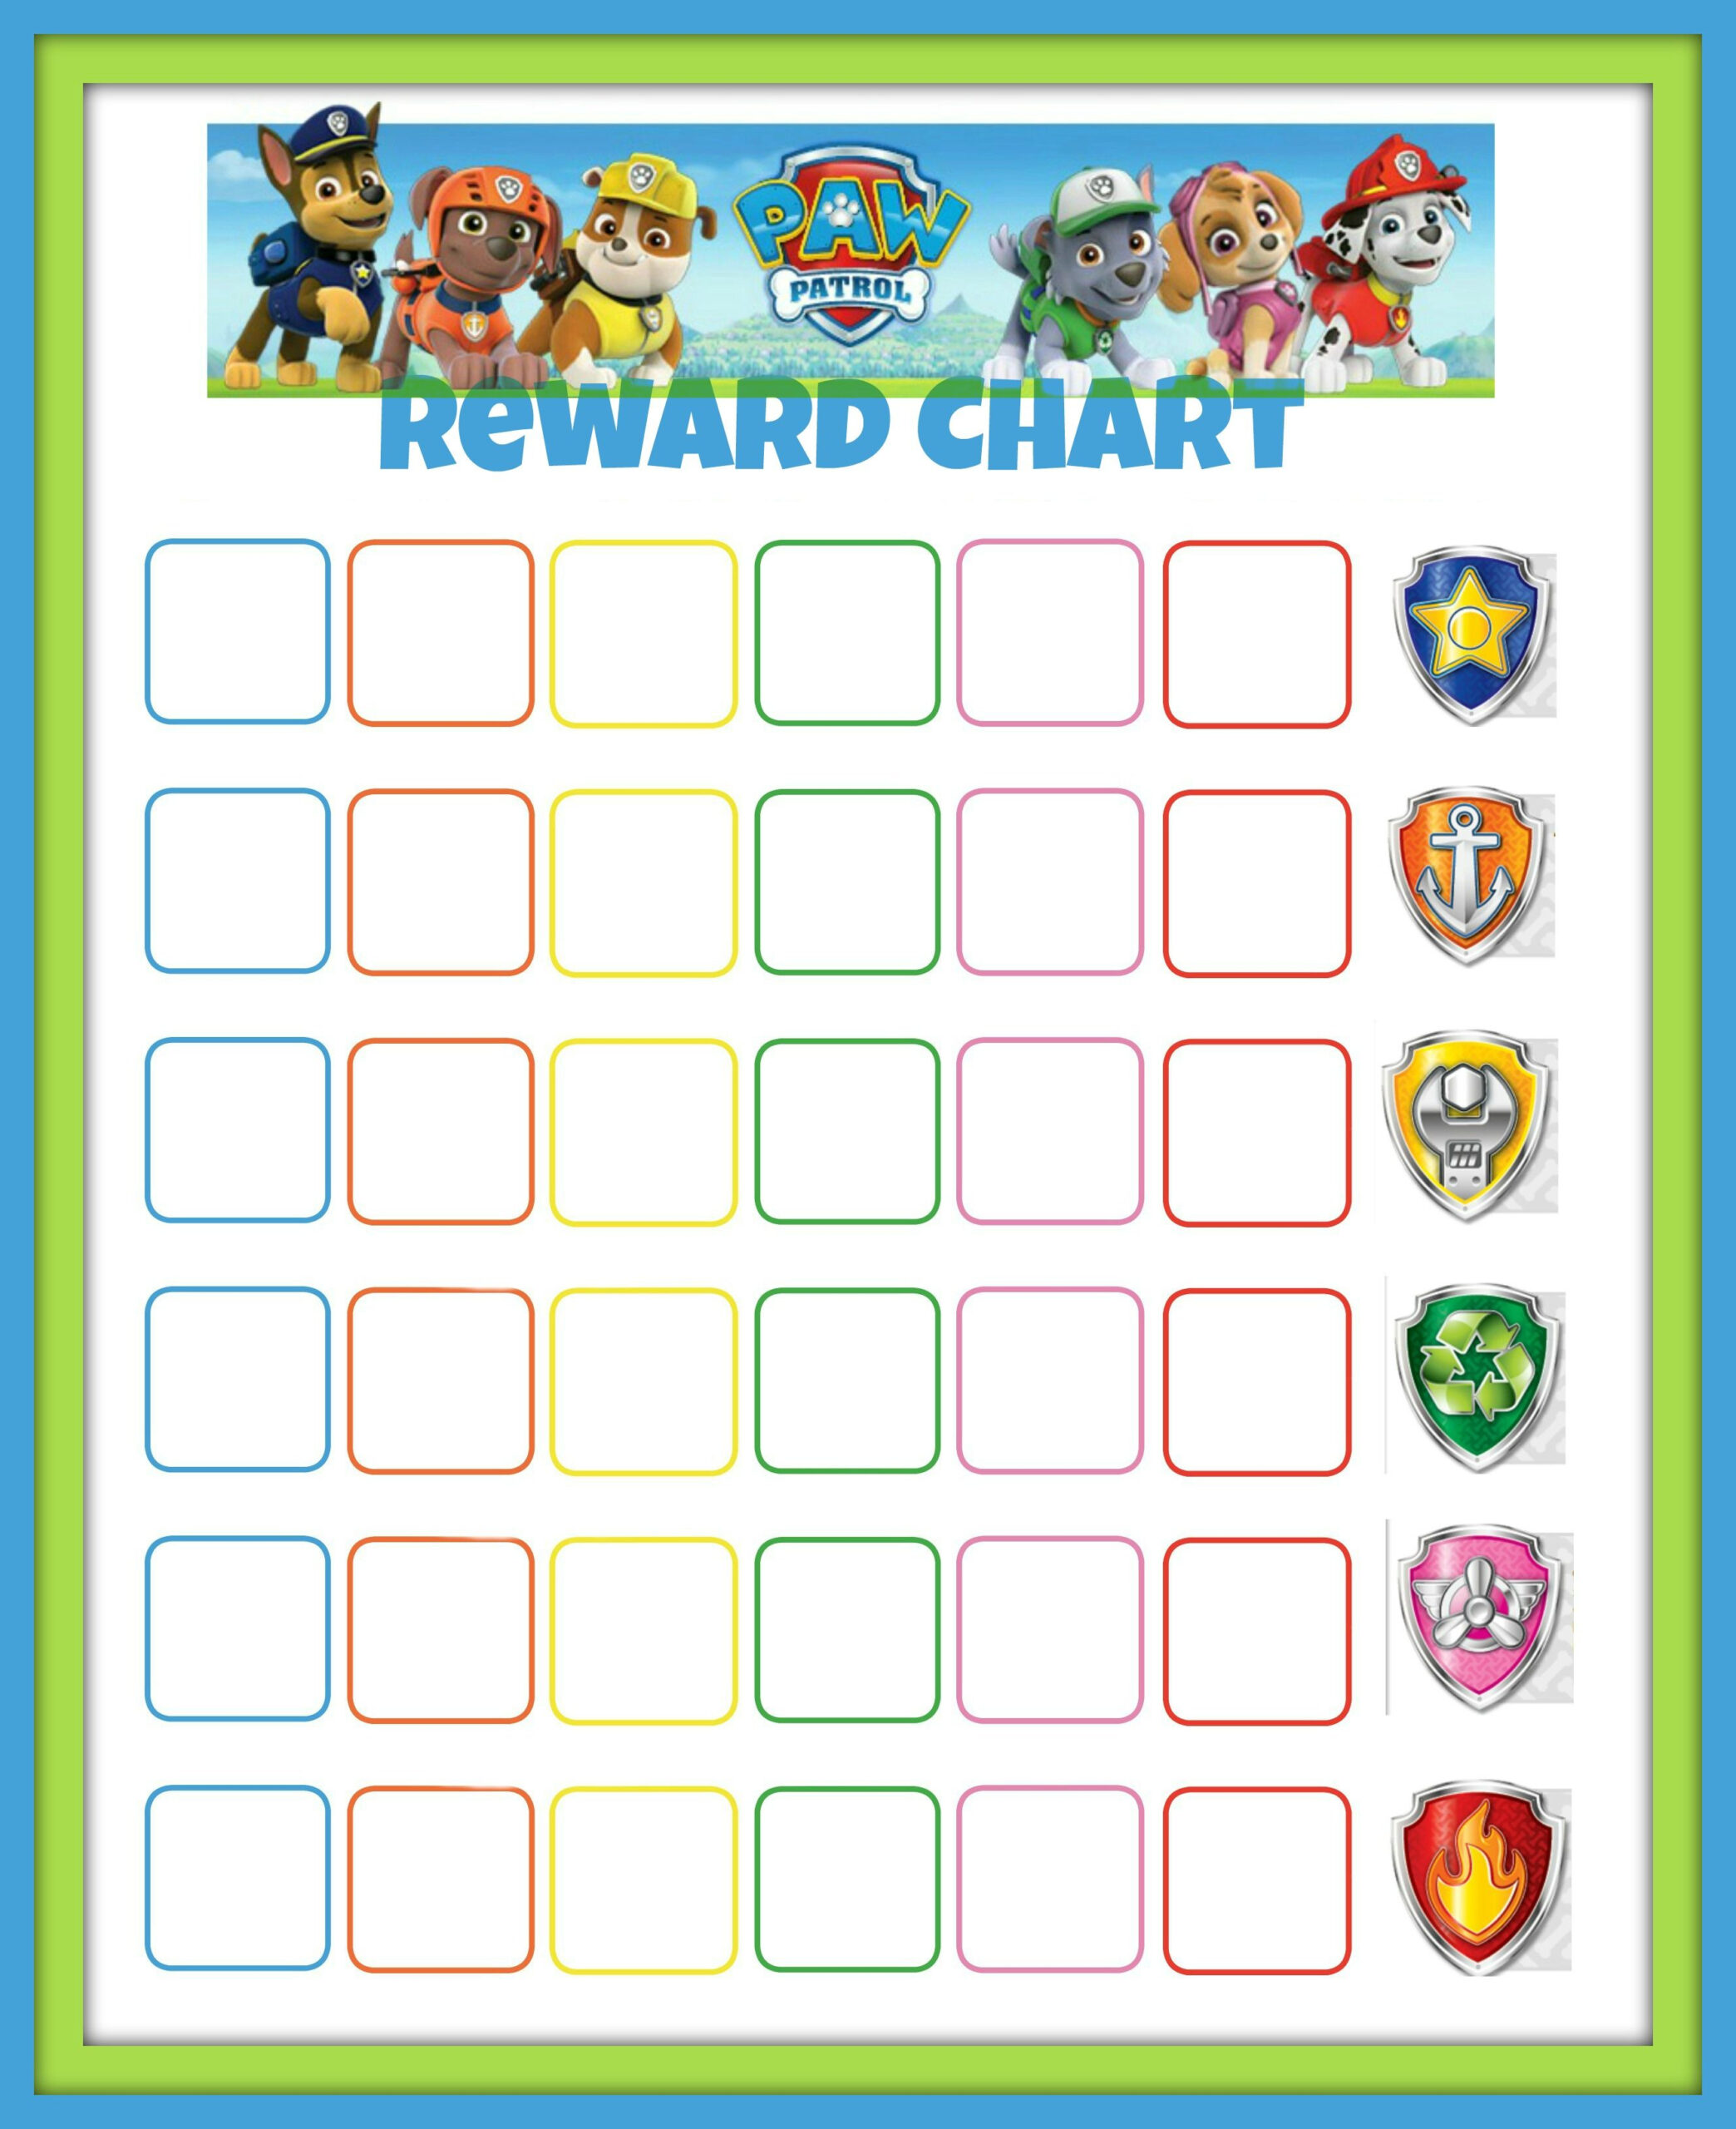 Paw Patrol Reward Chart Might Try To Get Jack To Sleep On His Own